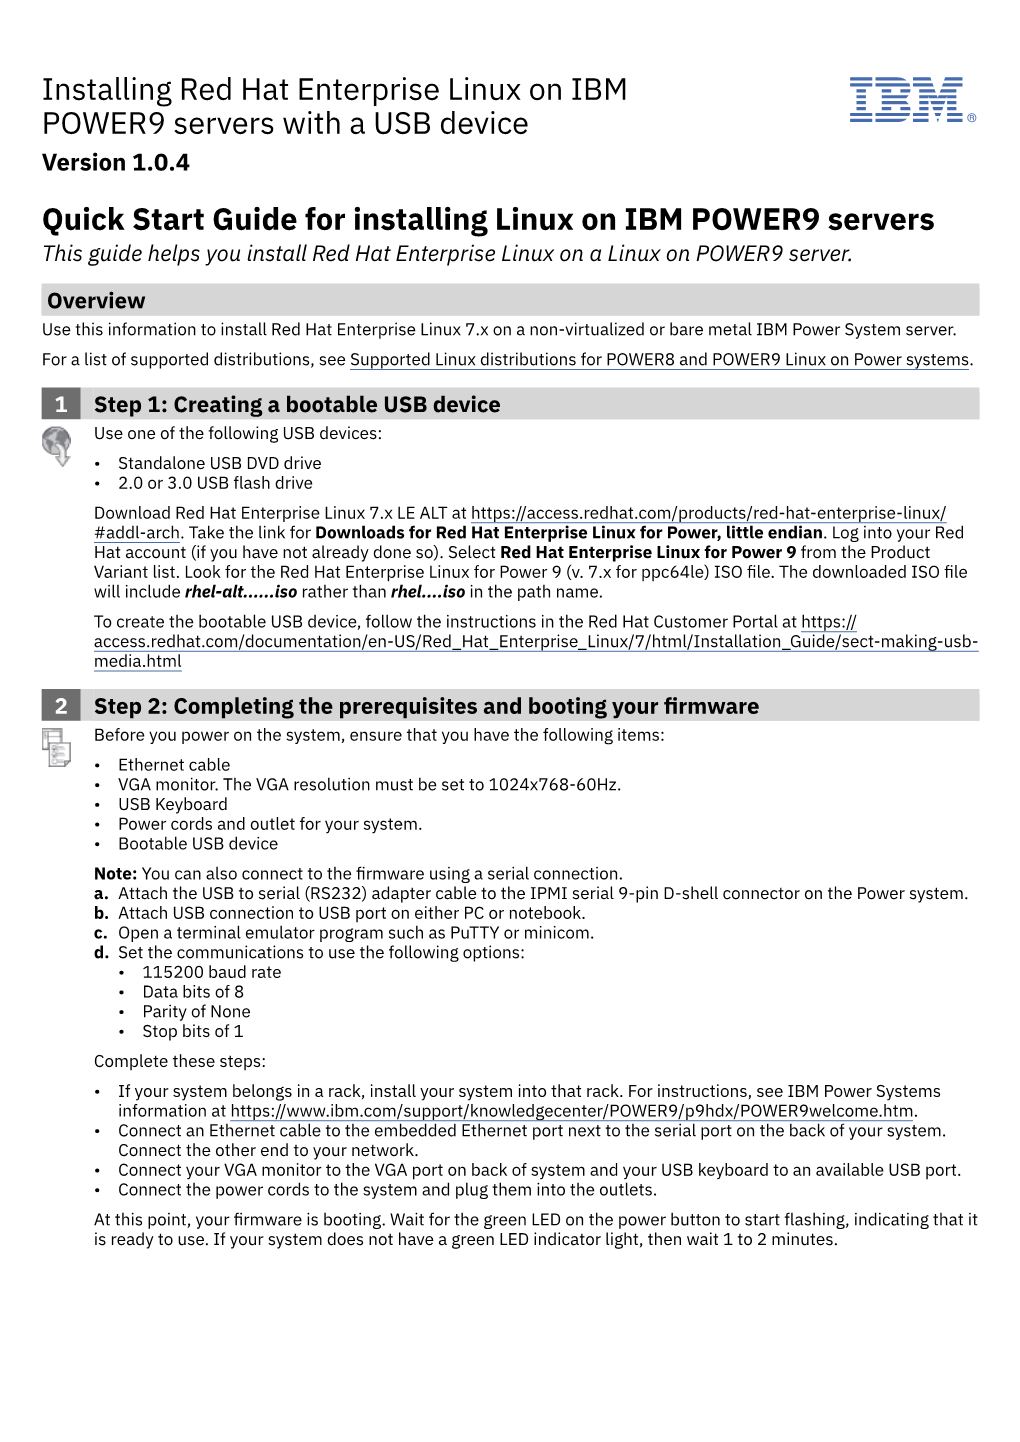 Installing Red Hat Enterprise Linux on IBM POWER9 Servers with a USB Device Quick Start Guide for Installing Linux on IBM POWER9